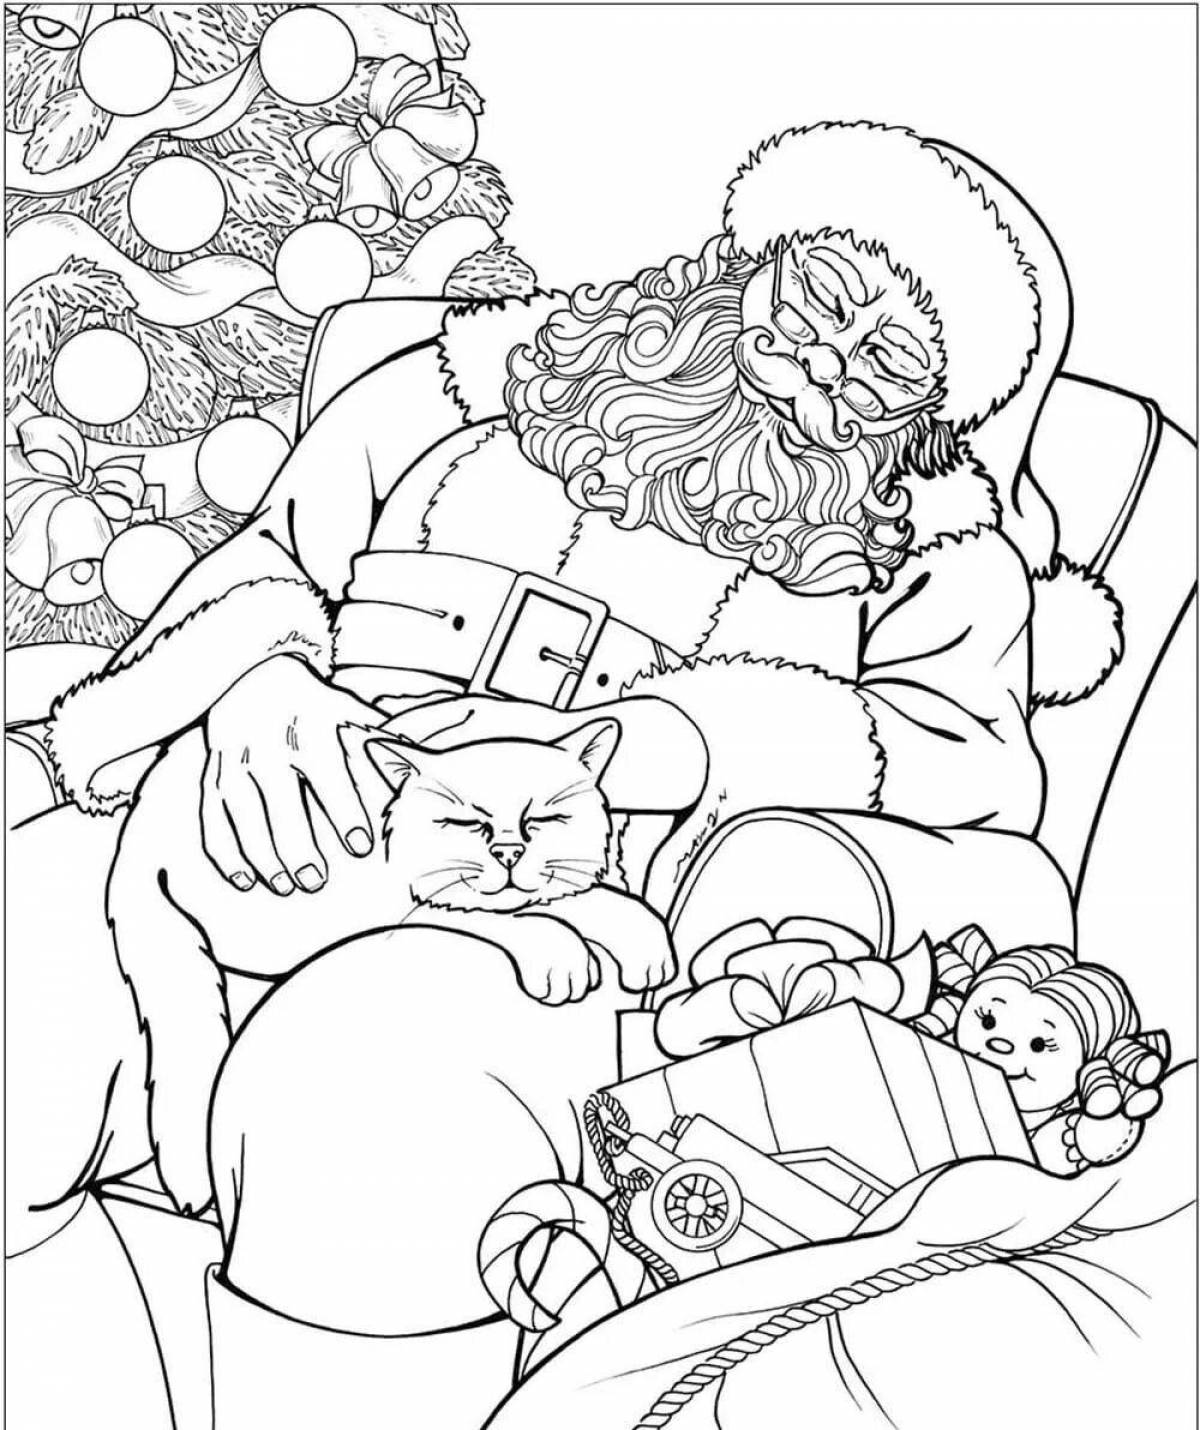 Luxury Christmas coloring book for adults